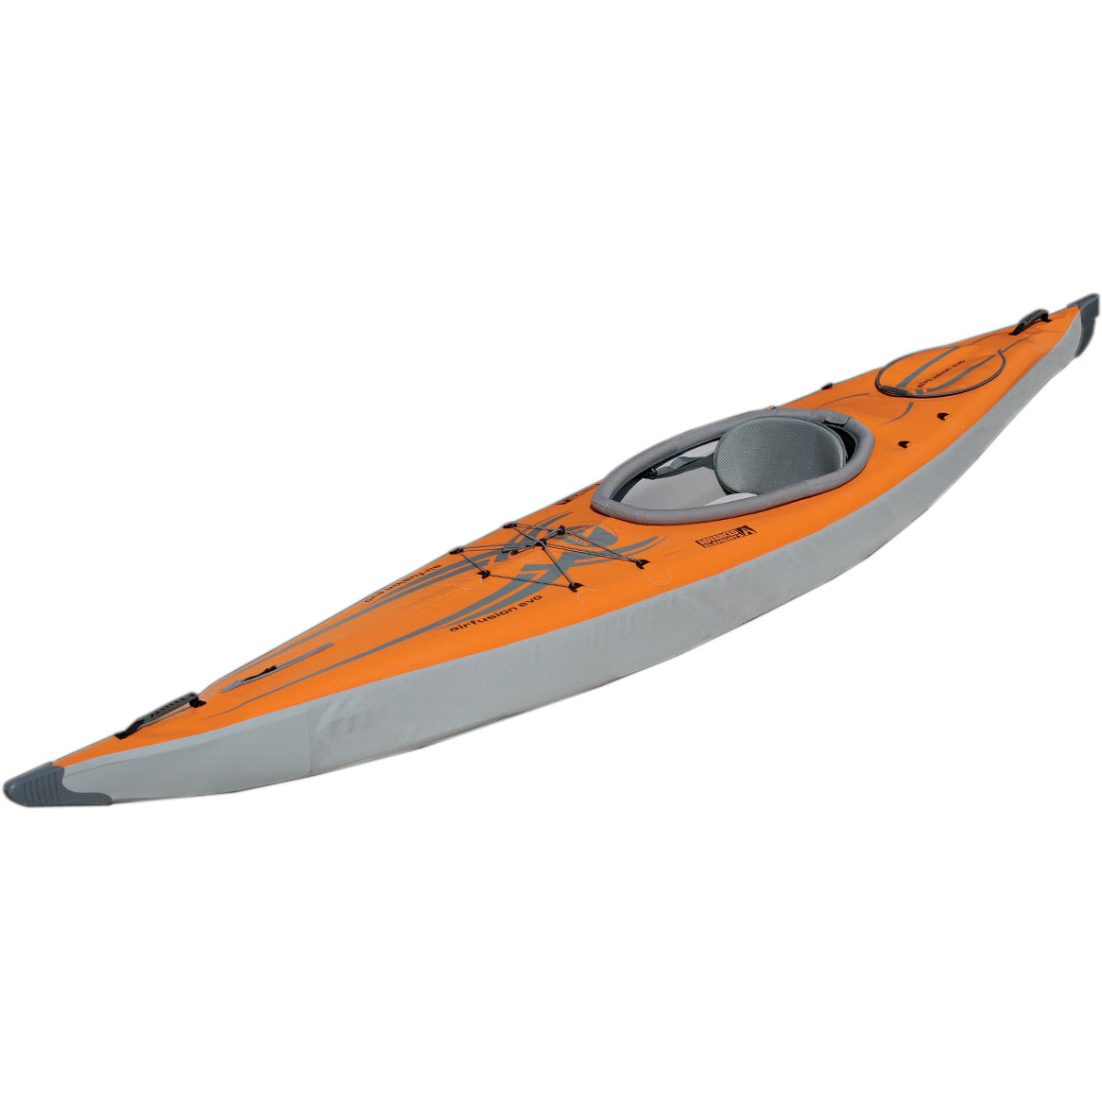 Advanced Elements AirFusion Evo Inflatable Kayak 66986 scaled